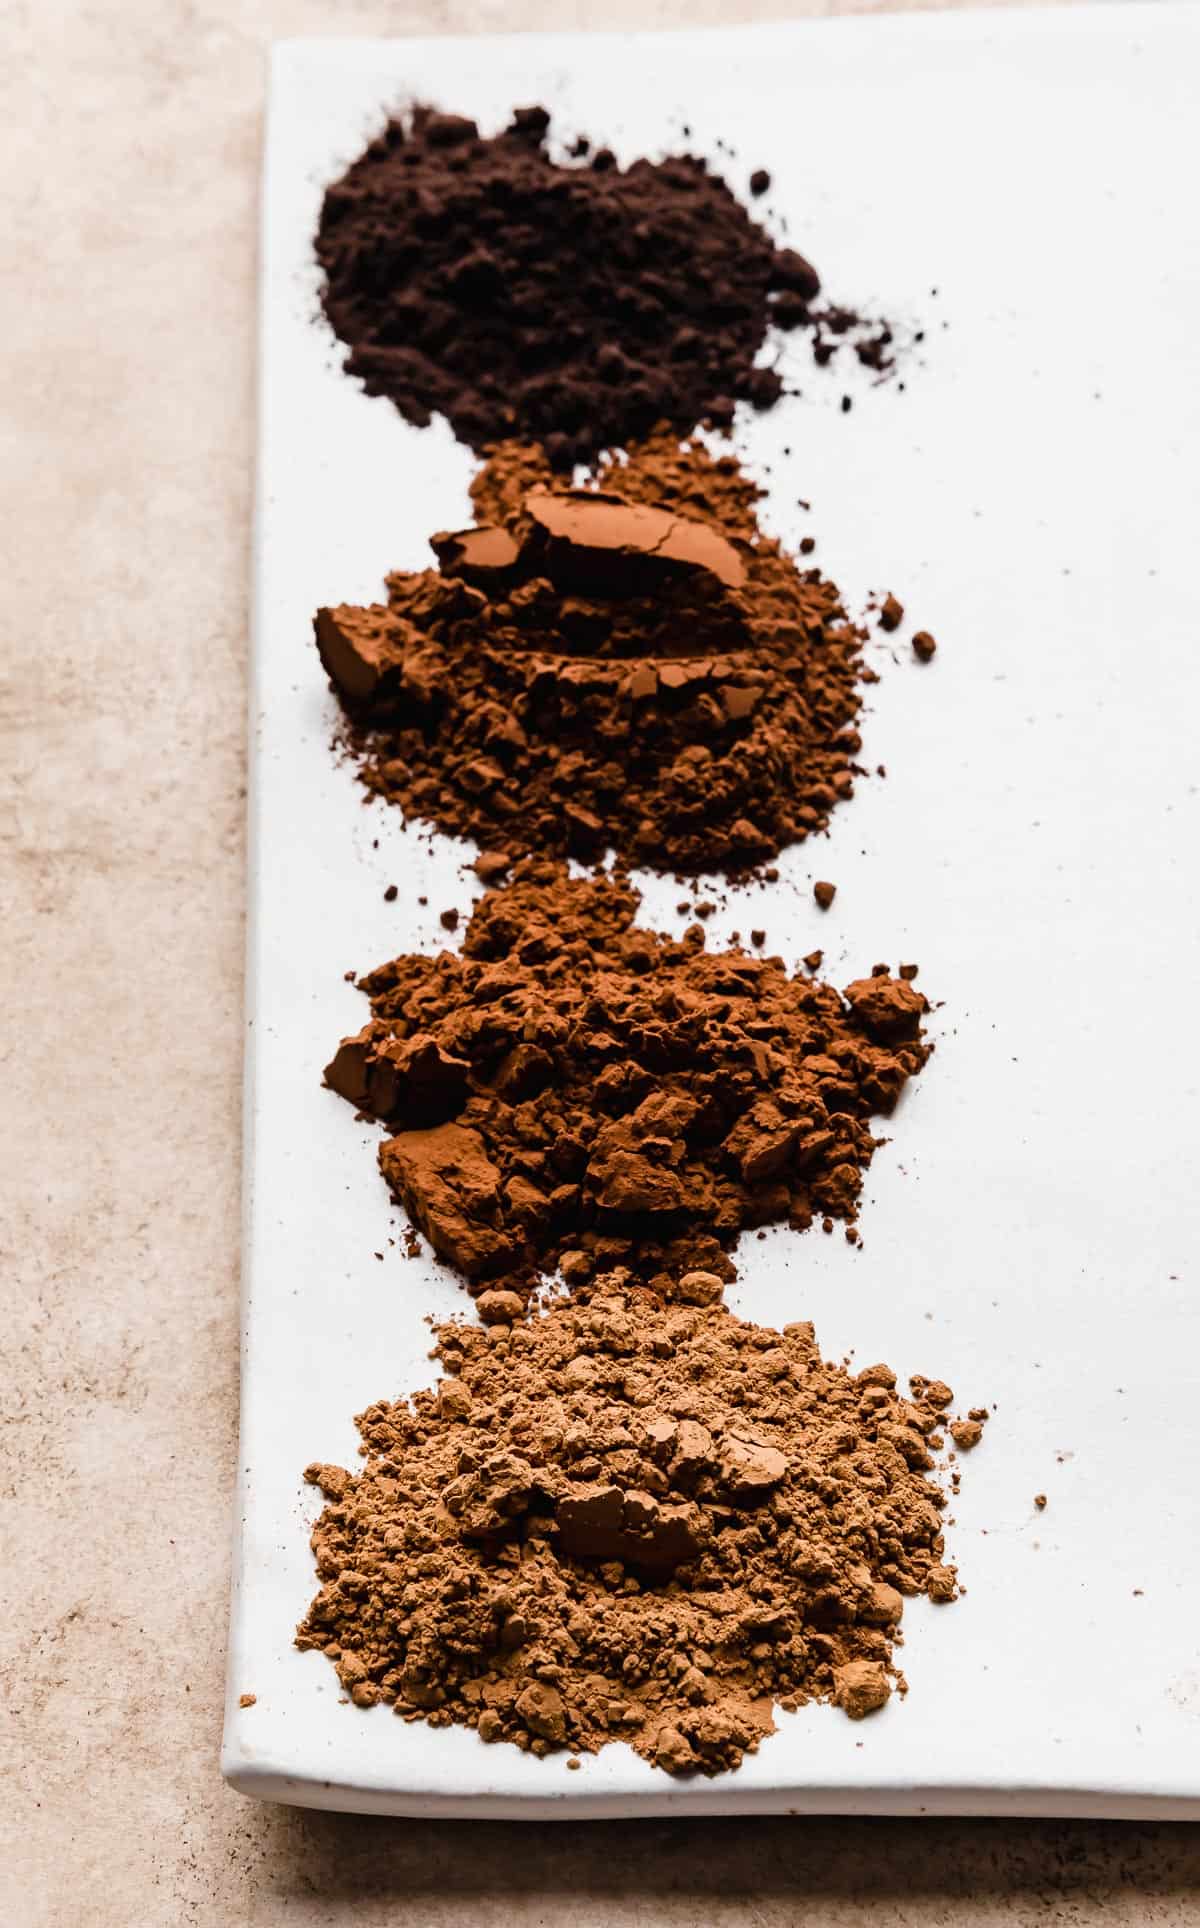 Small piles of different cocoa powders on a white plate.